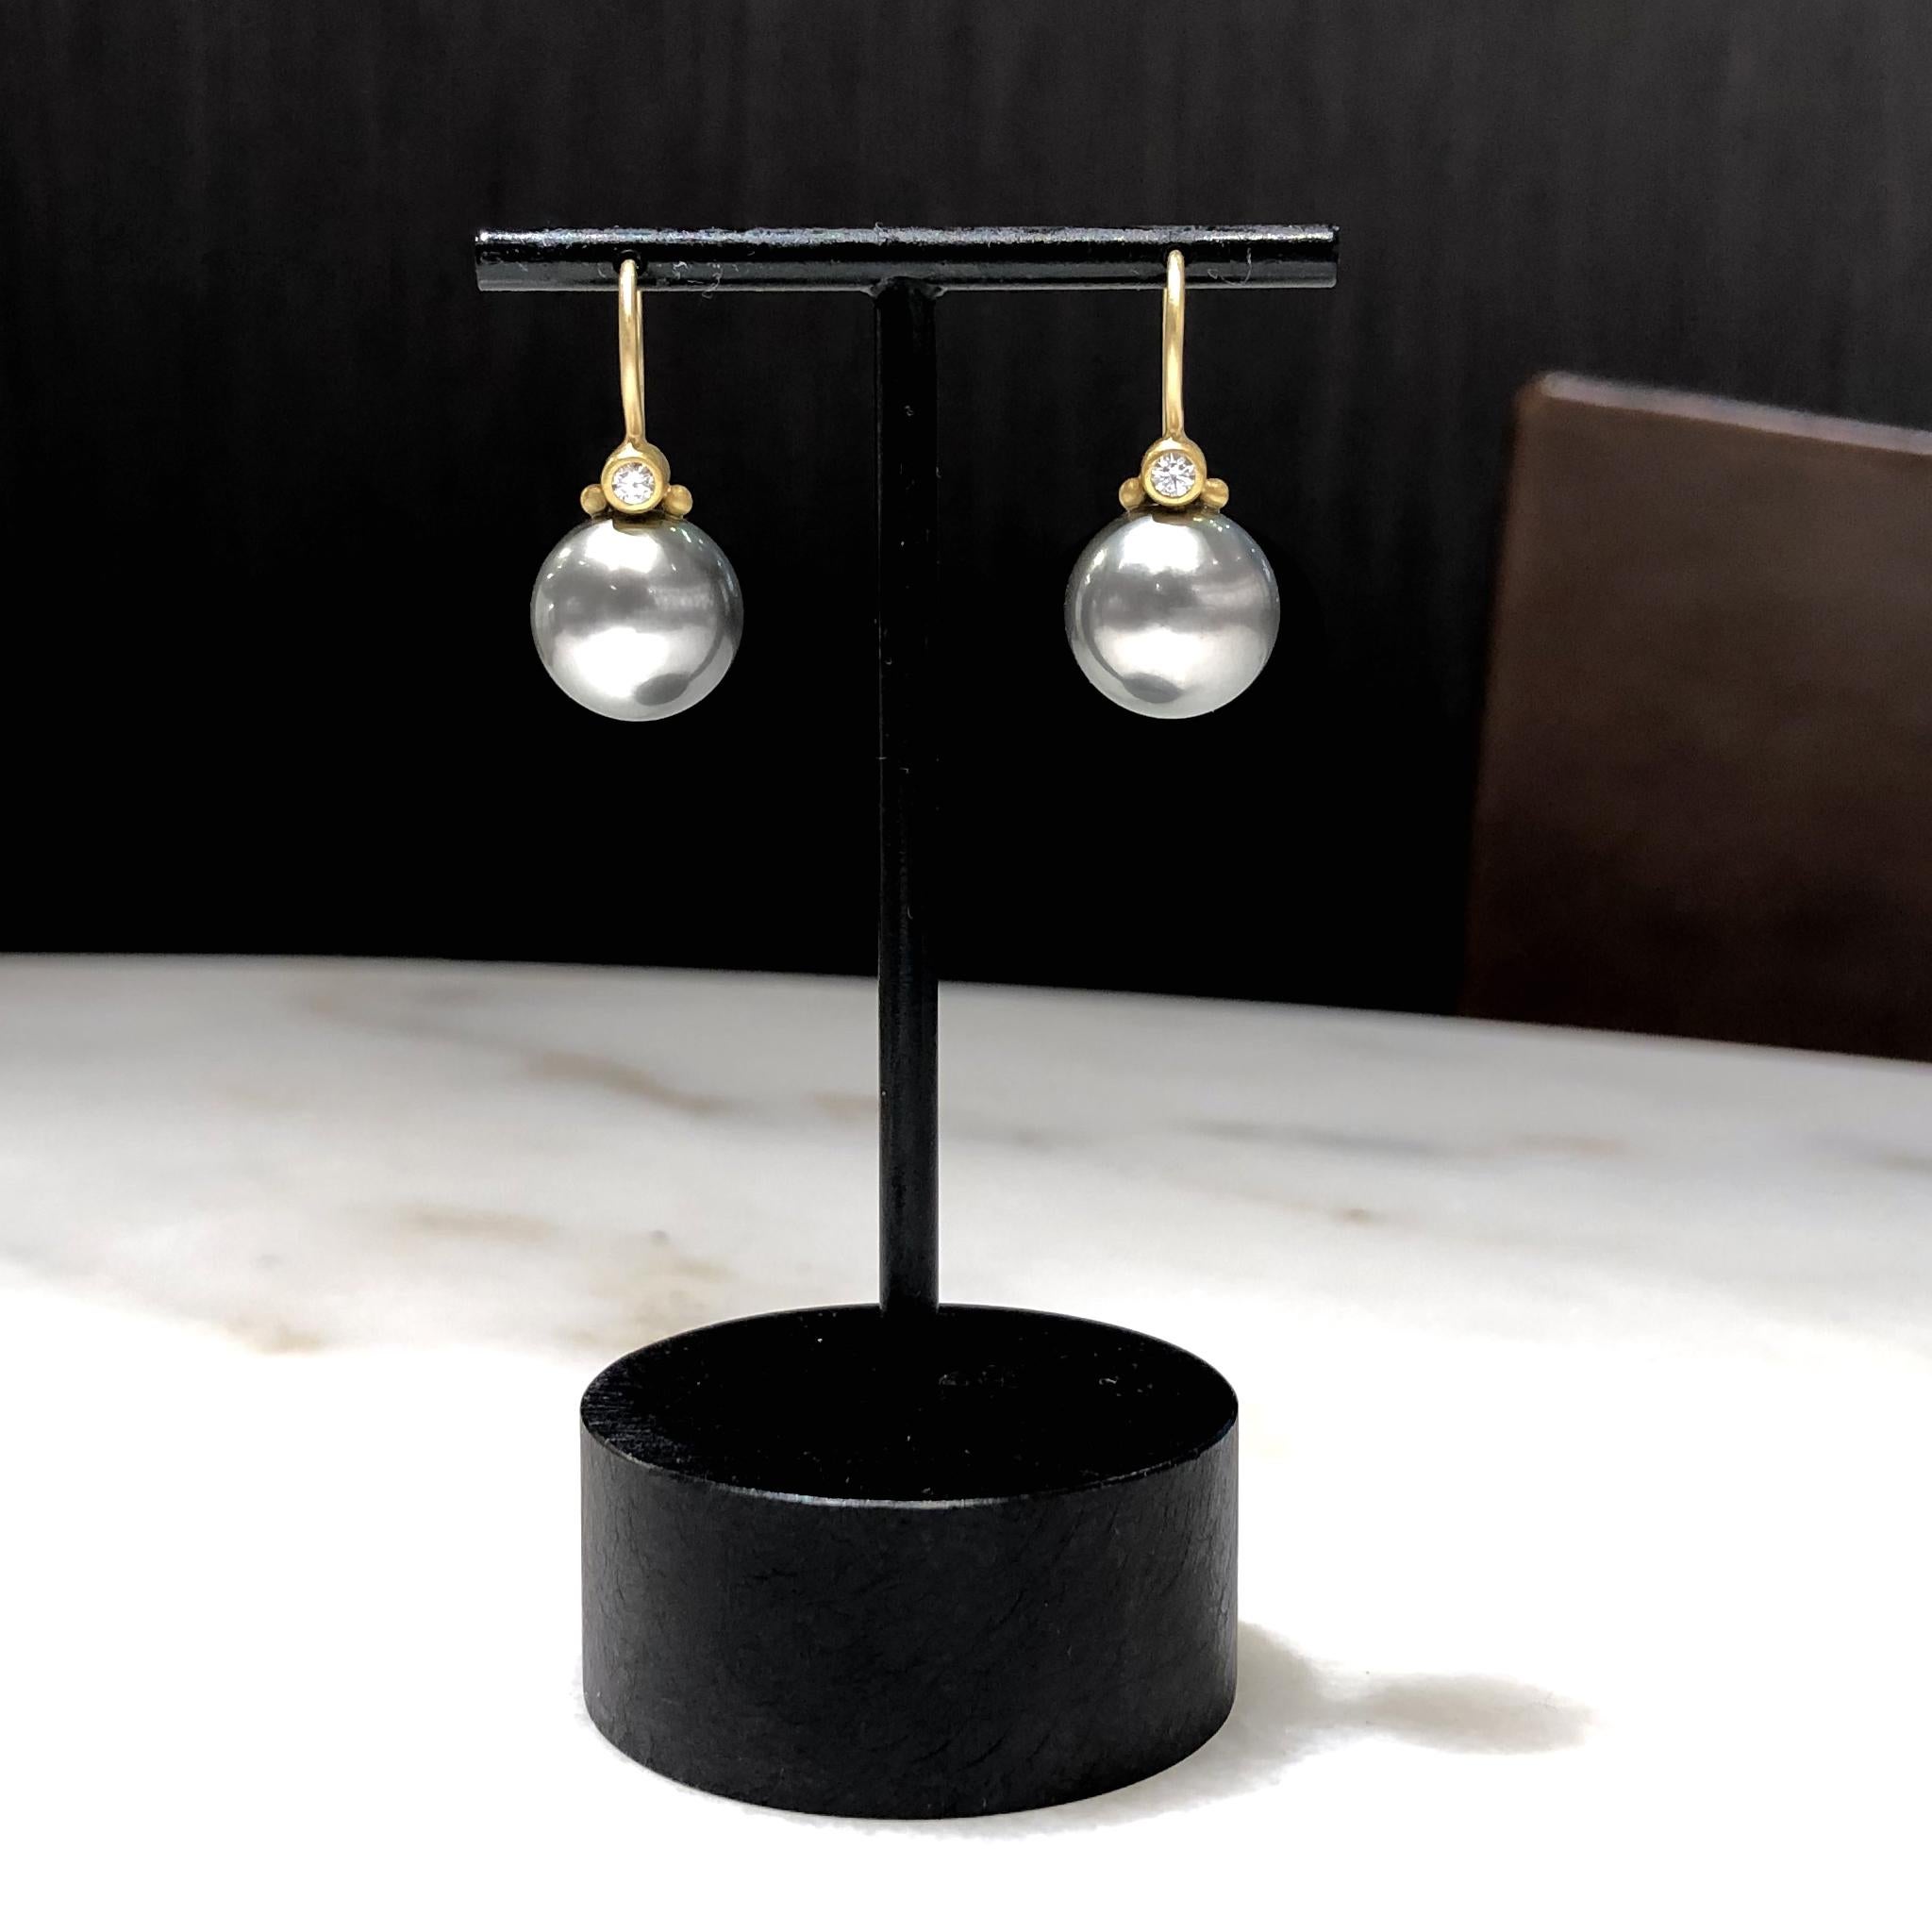 Drop Earrings handmade by jewelry artist Denise Betesh in her signature matte-finished 22k yellow gold featuring a matched pair of lustrous 11mm deep gray Tahitian pearls invisibly-set beneath 0.10 total carats of round brilliant-cut white diamonds